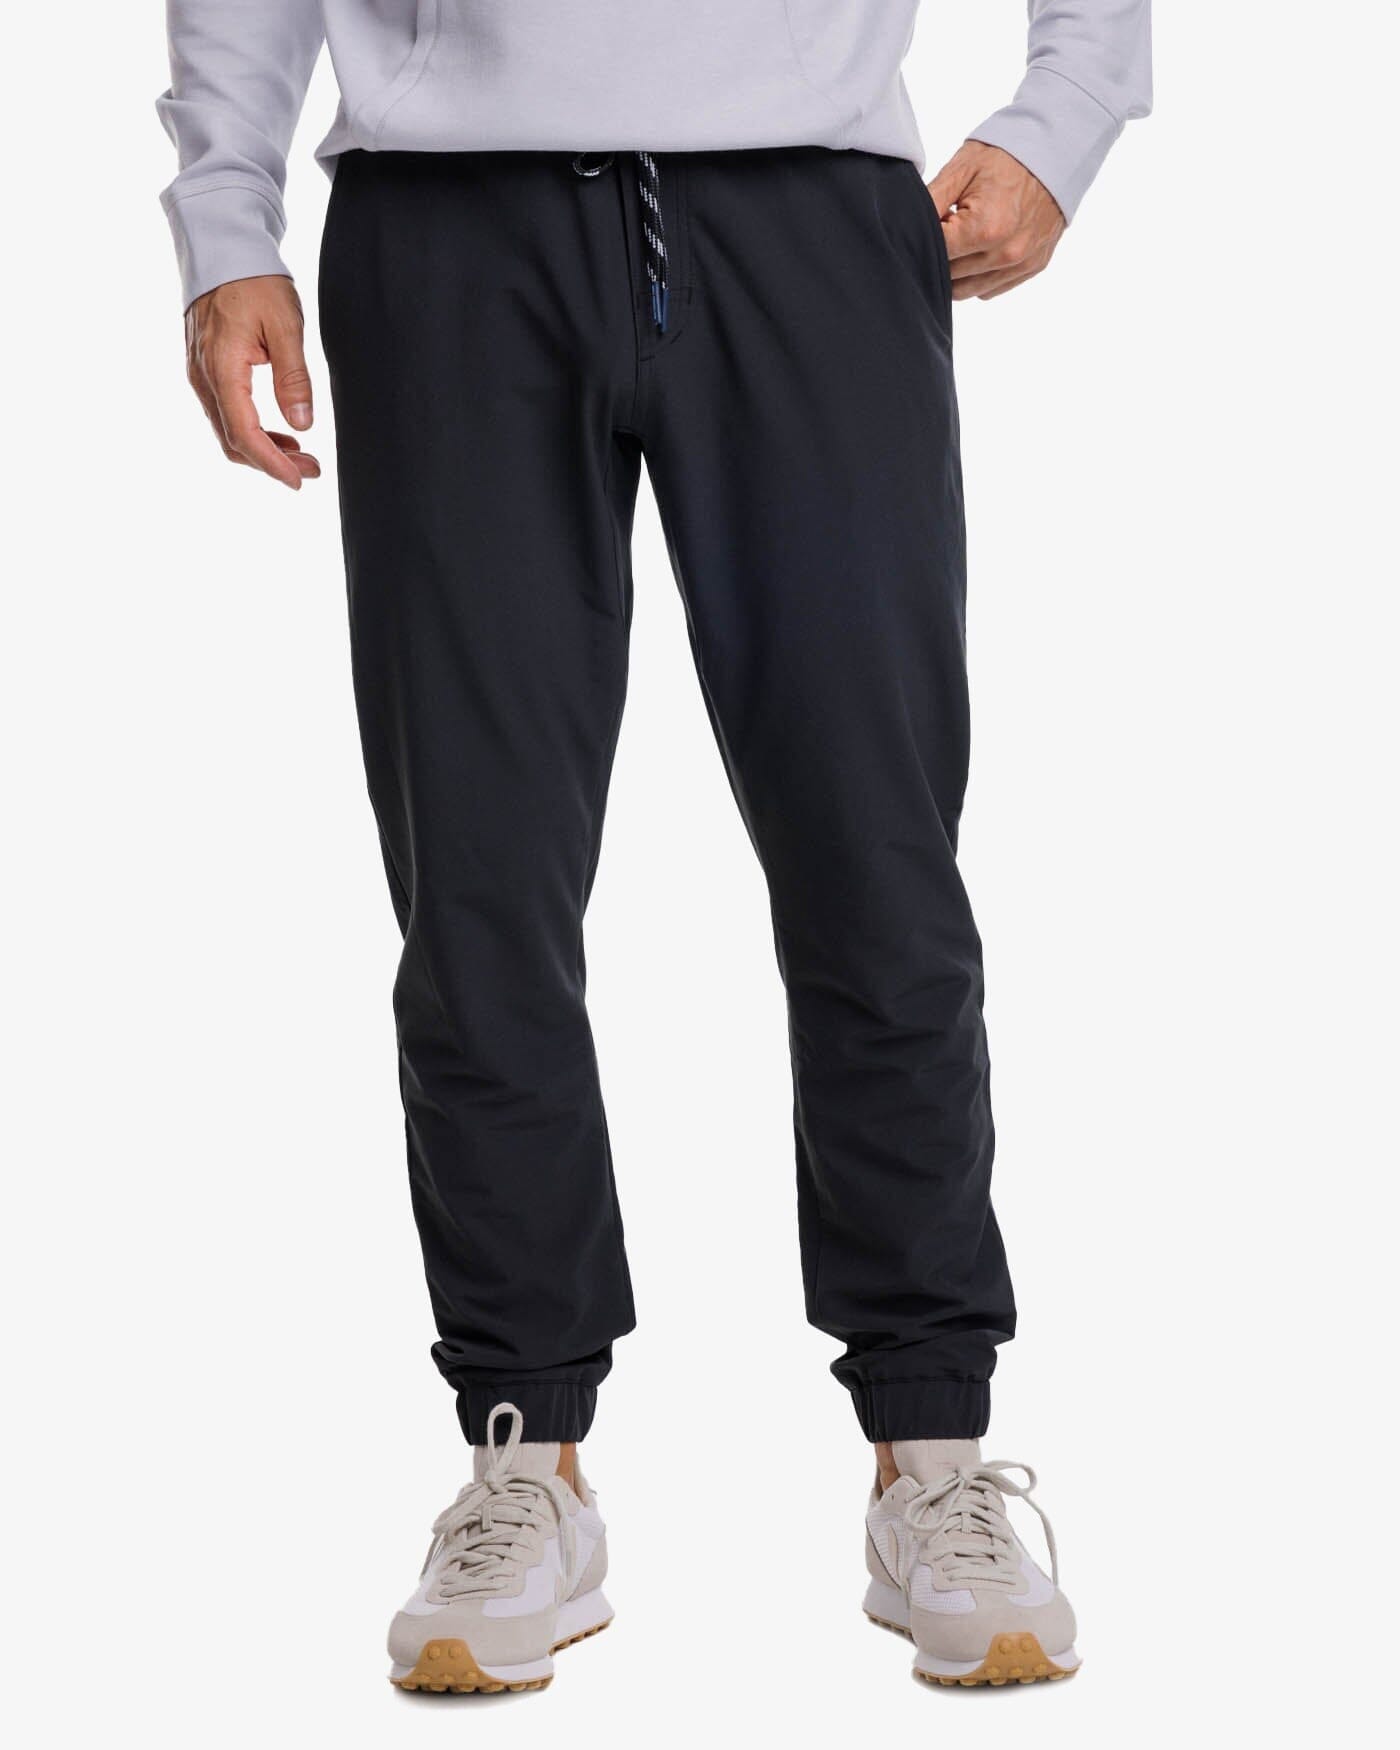 YUHAOTIN Joggers for Men Slim Fit Mens Youth Business Breathable